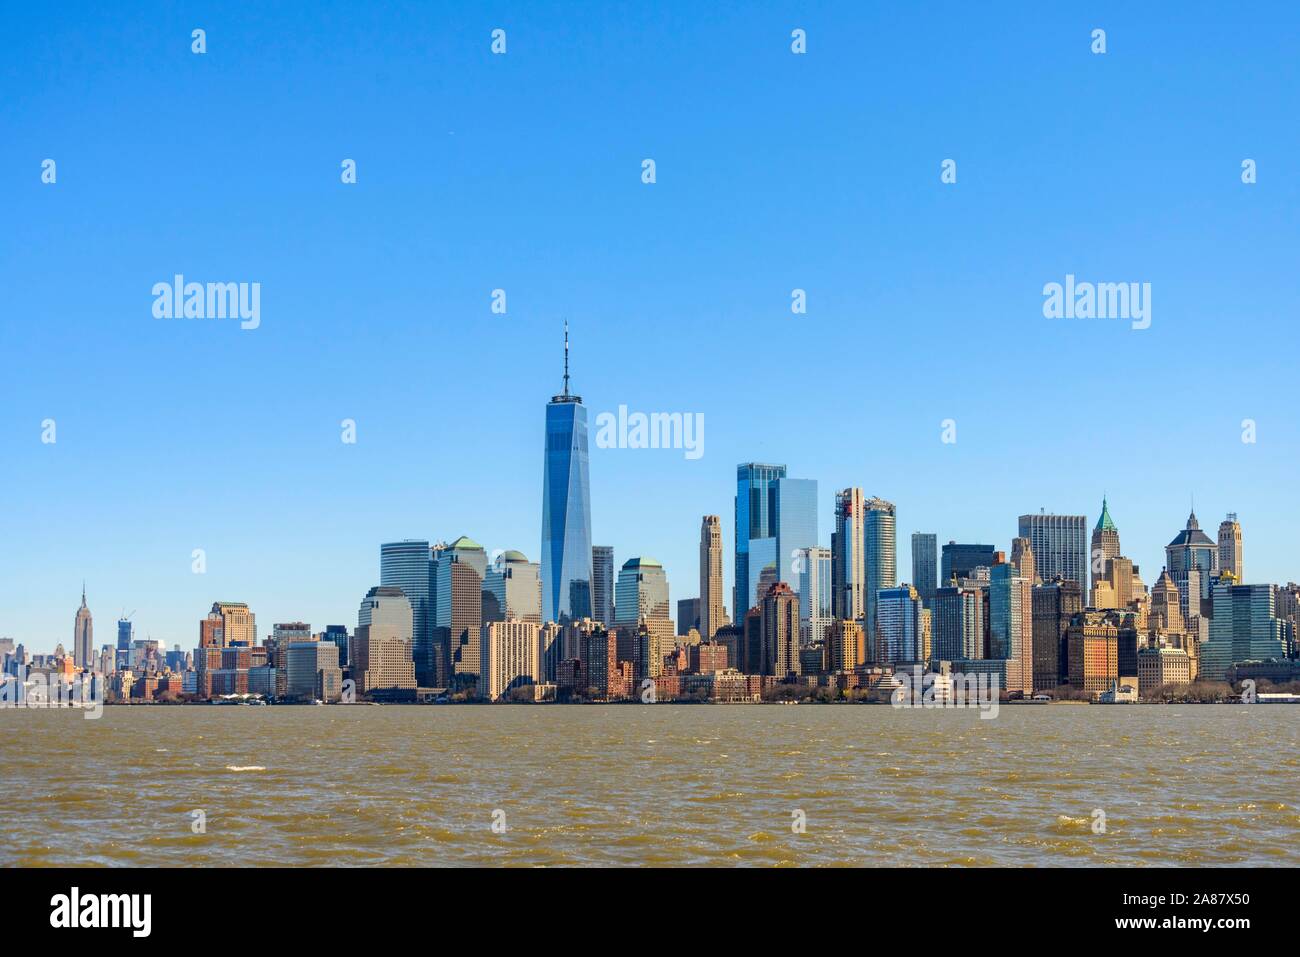 View from Hudson River to the skyline of Lower Manhattan with skyscrapers, New York City, New York, USA Stock Photo